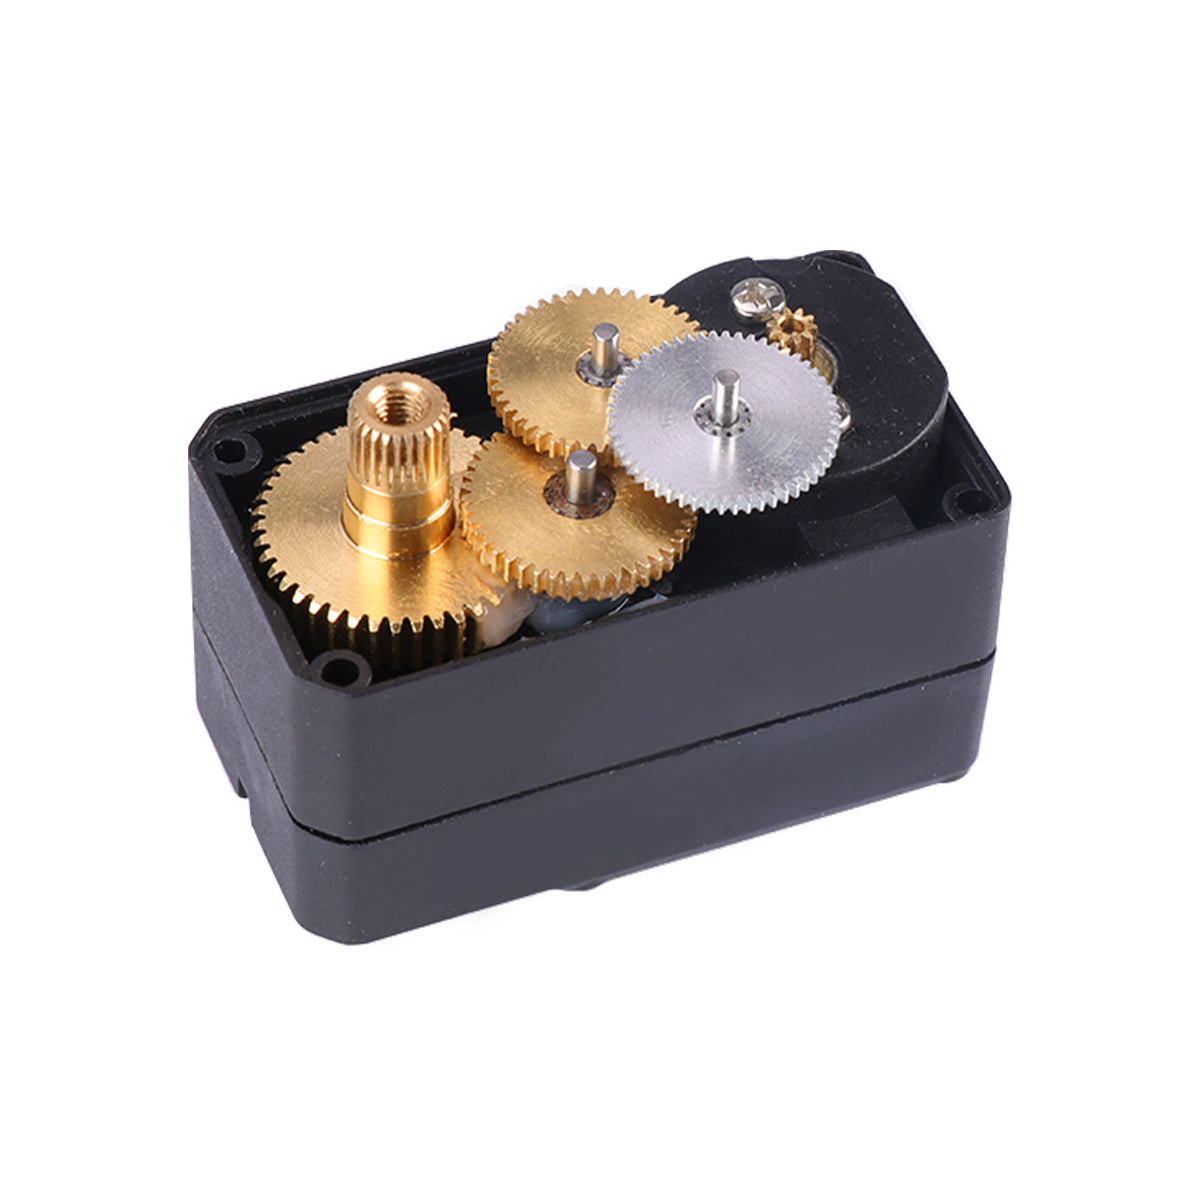 Hiwonder HX-35H Serial Bus High Voltage Servo with Double Shaft, 35KG Strong Torque and Data Feedback Function